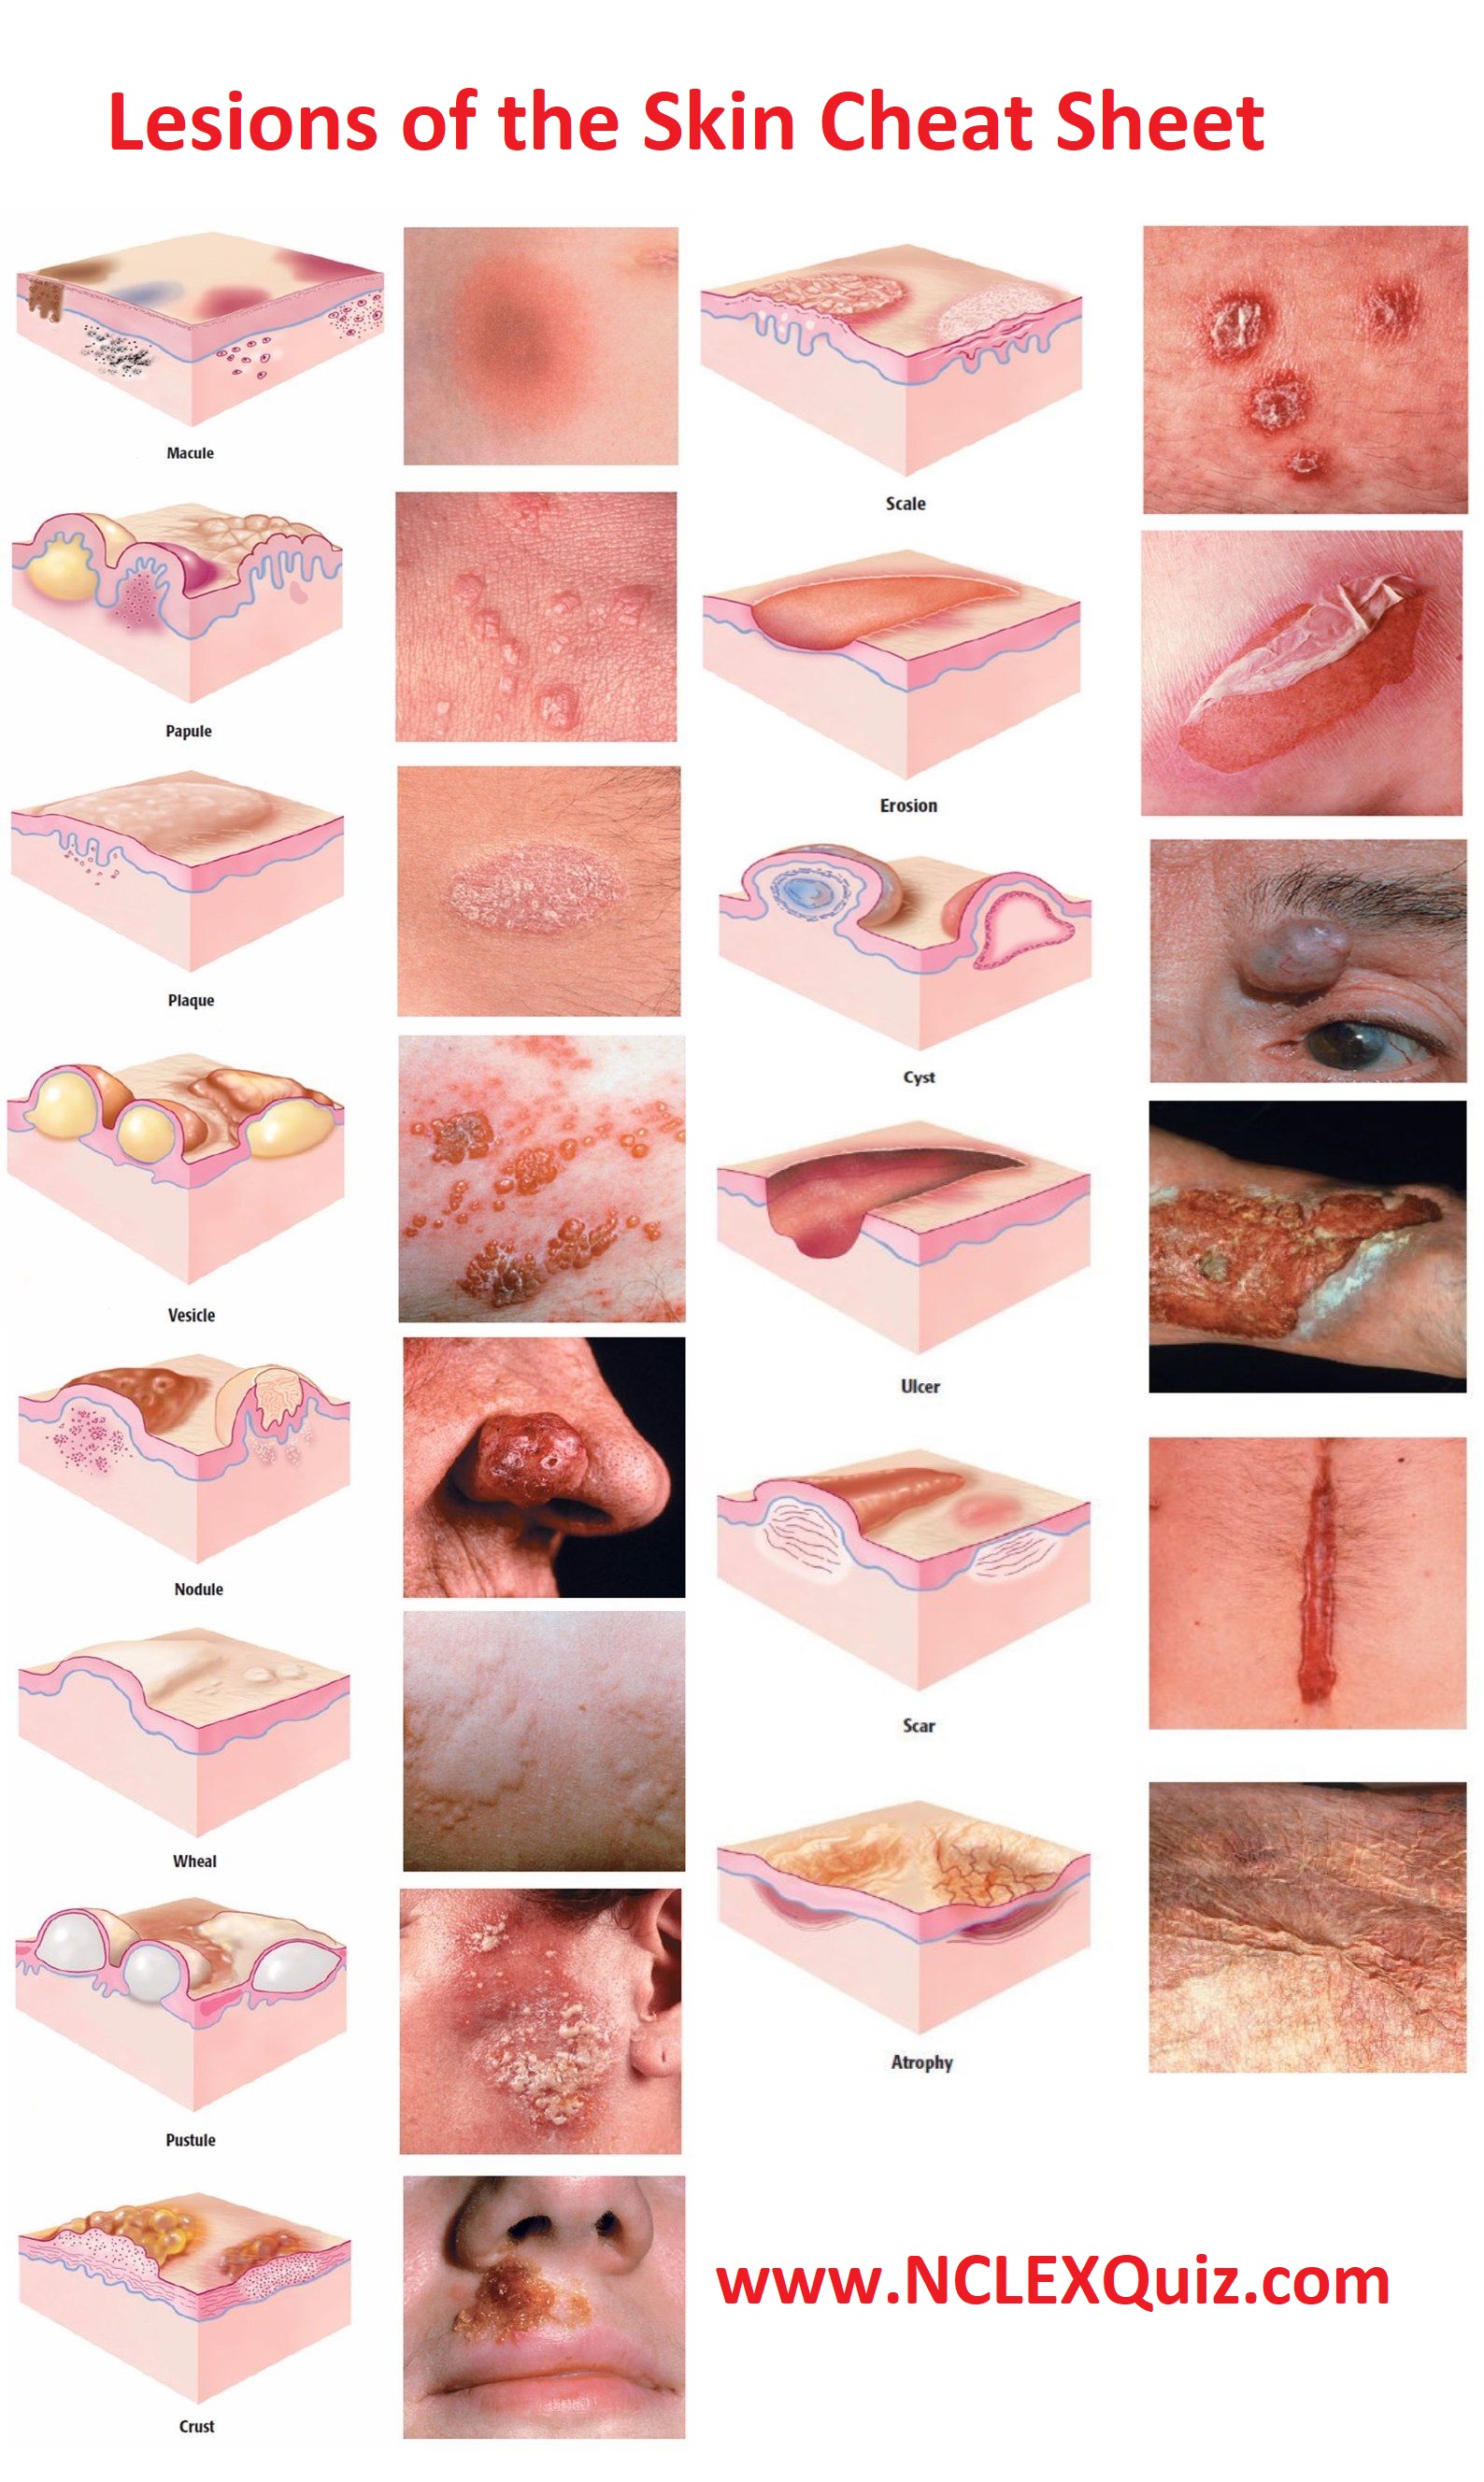 Types Of Skin Lesions Benign Skin Lesions Plastic Surgery Key | Images ...